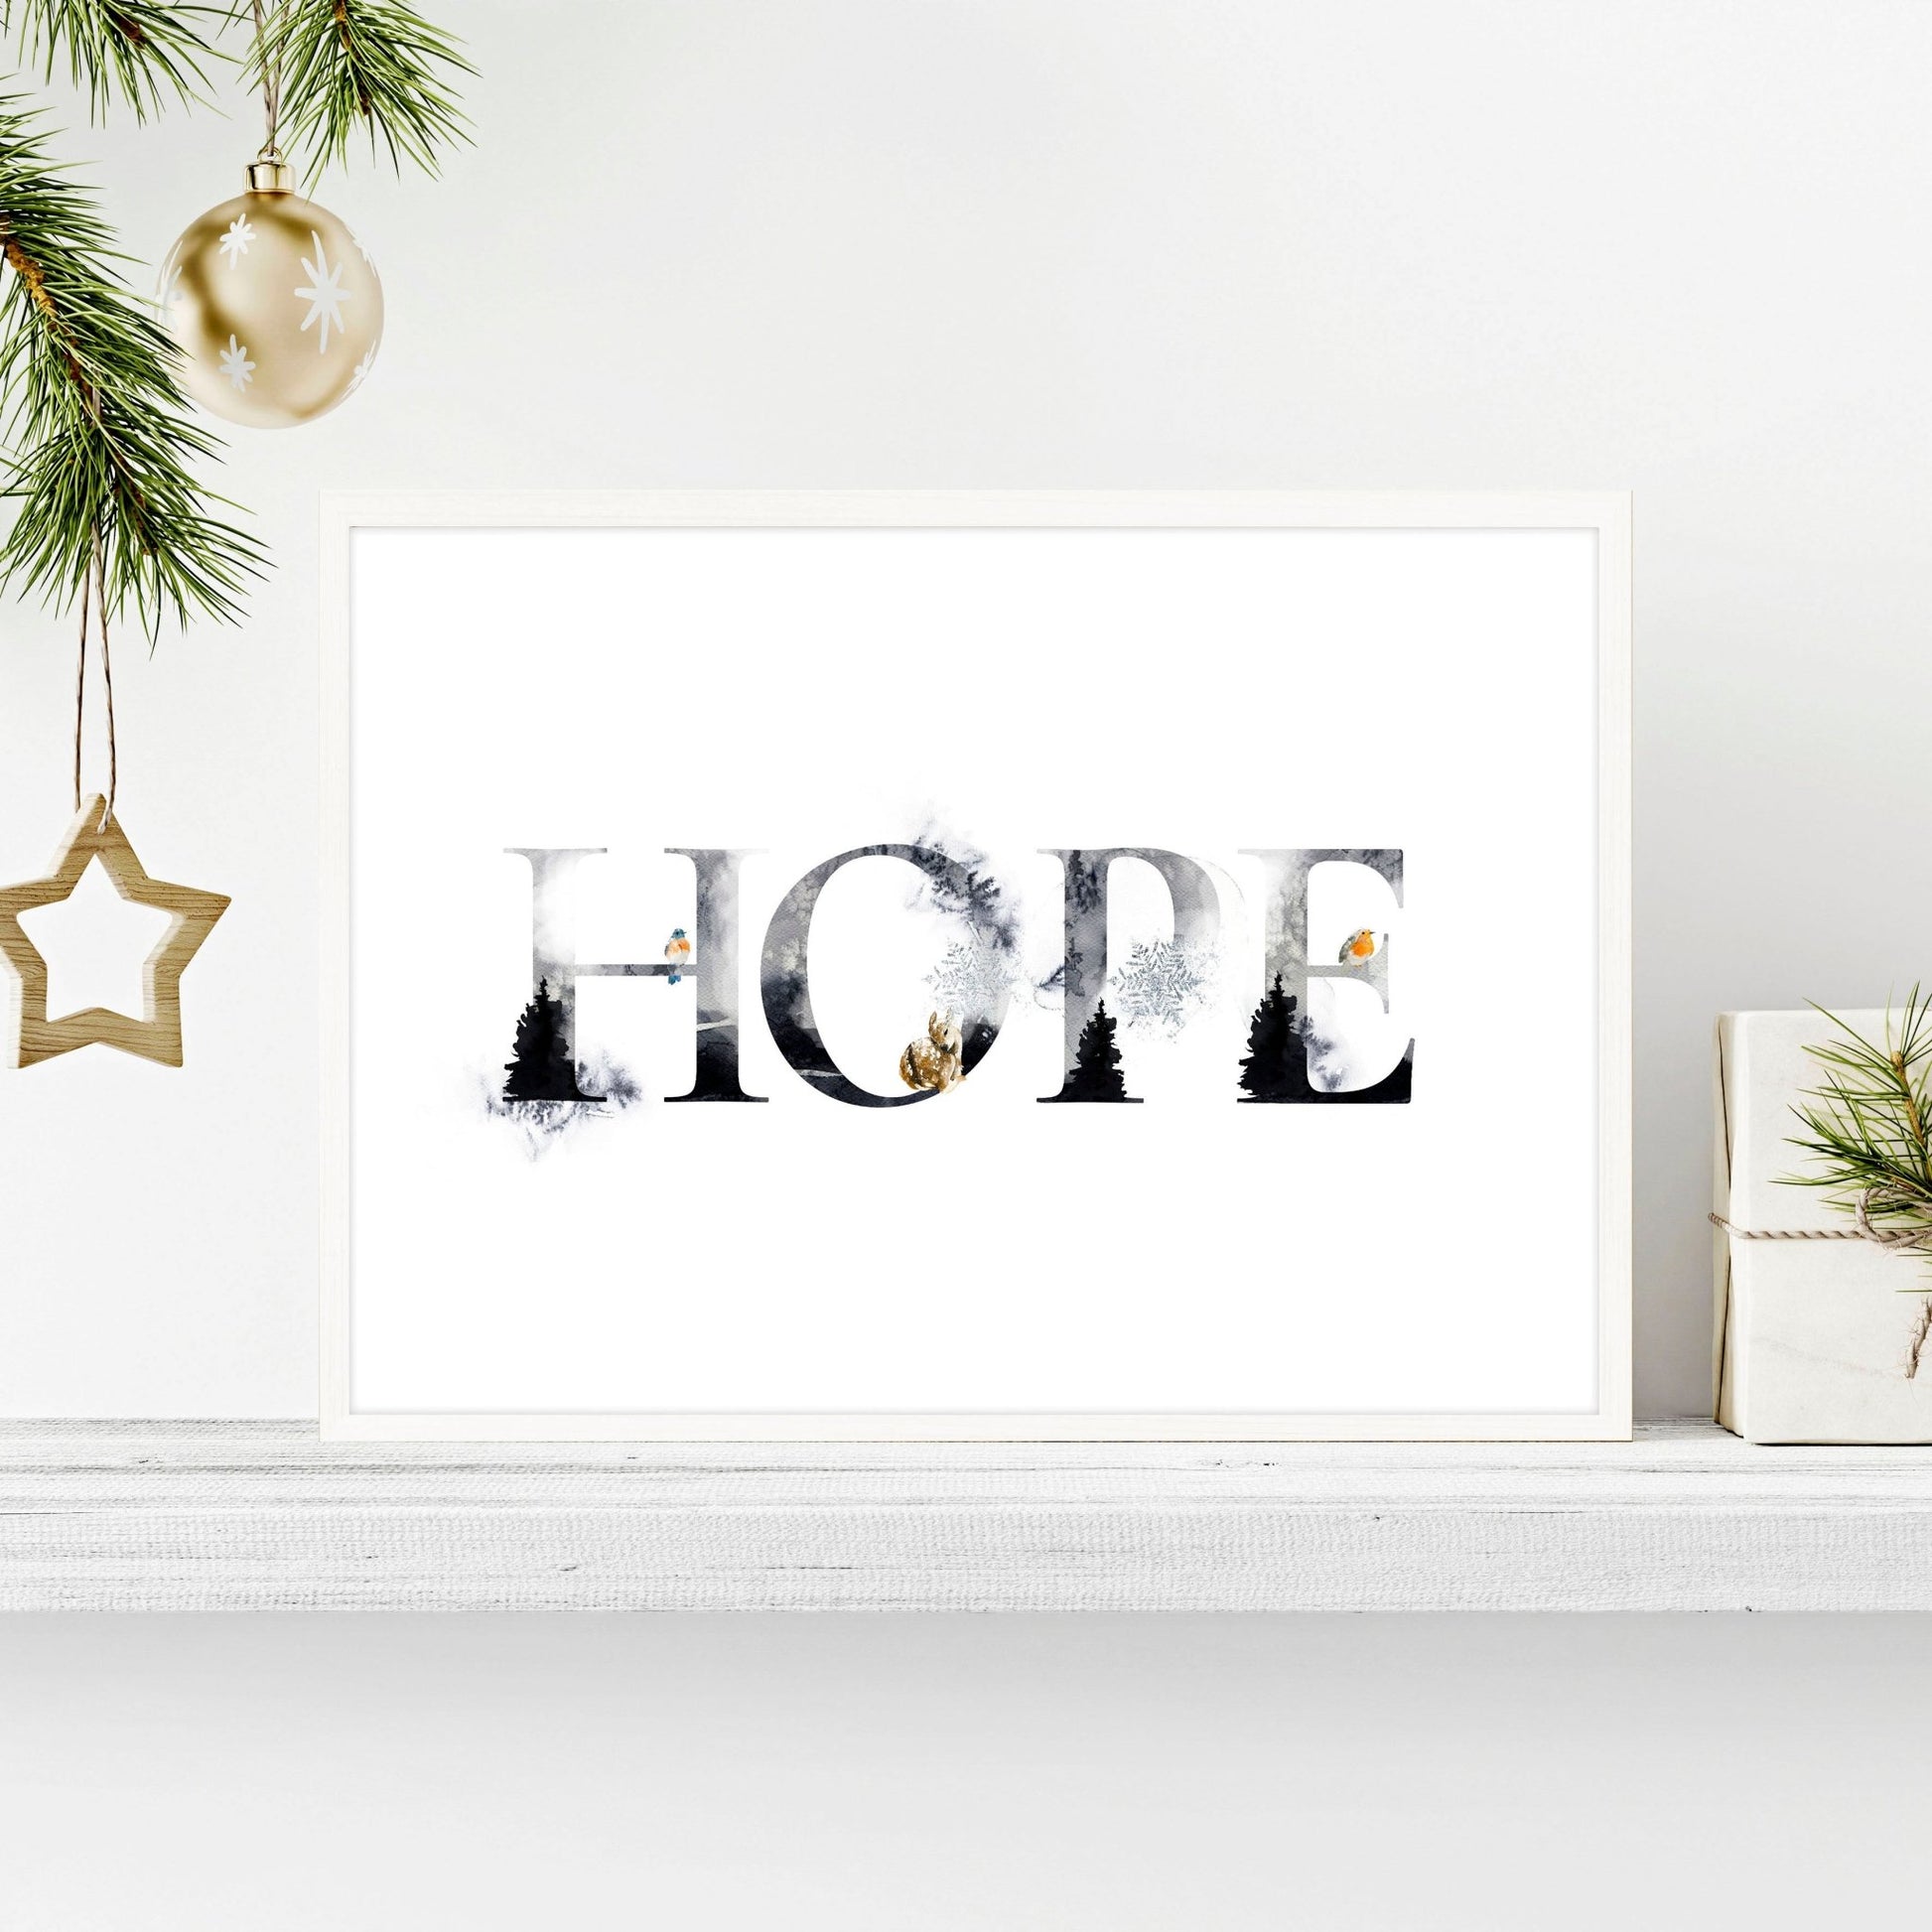 Hope wall art for Christmas decor - About Wall Art